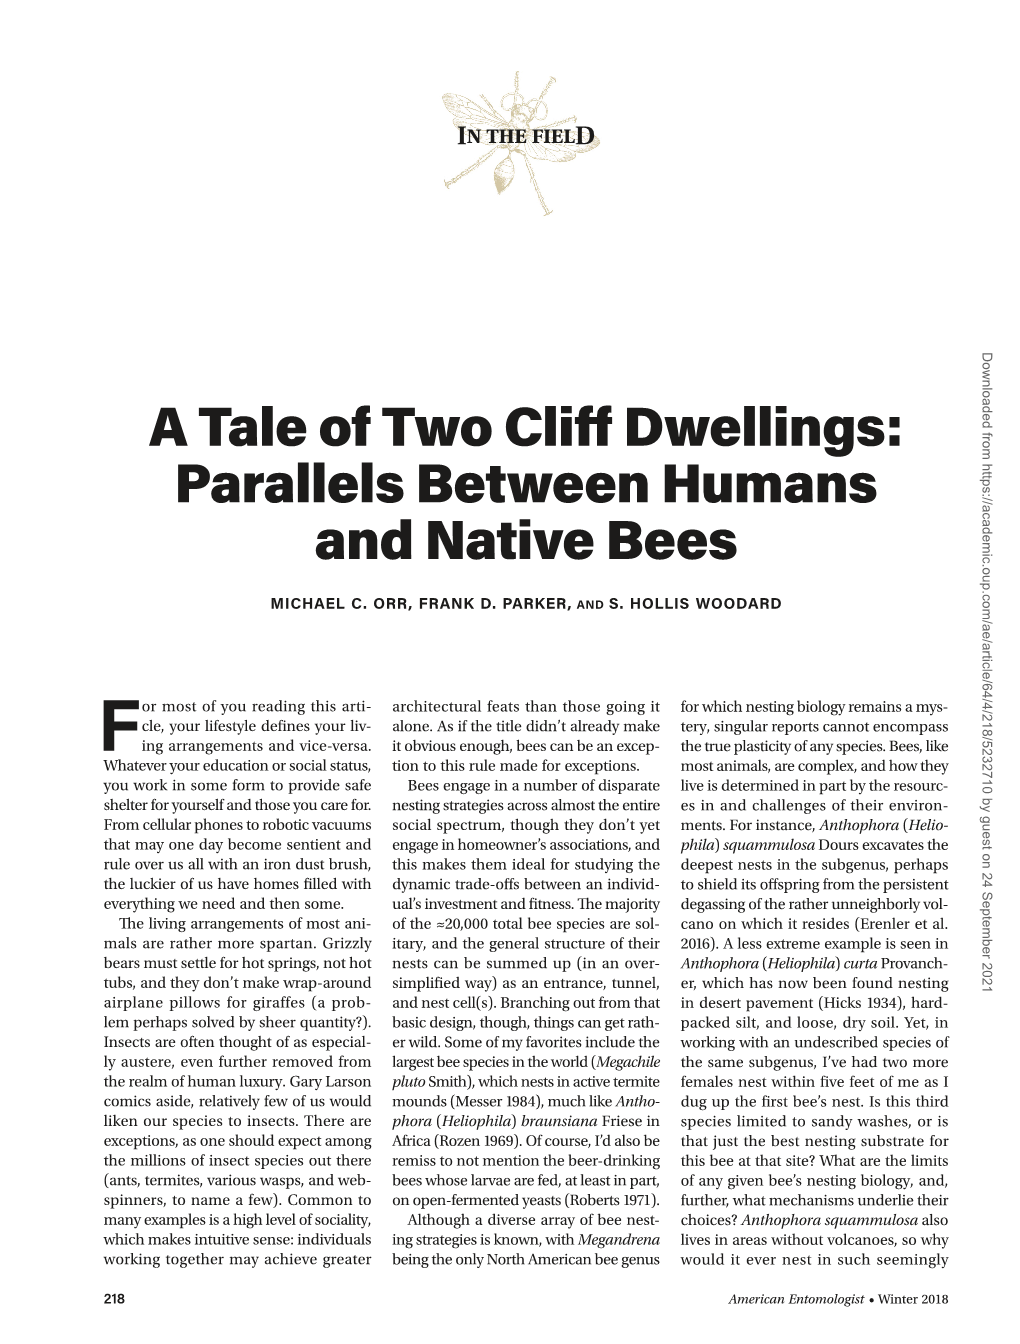 A Tale of Two Cliff Dwellings: Parallels Between Humans and Native Bees